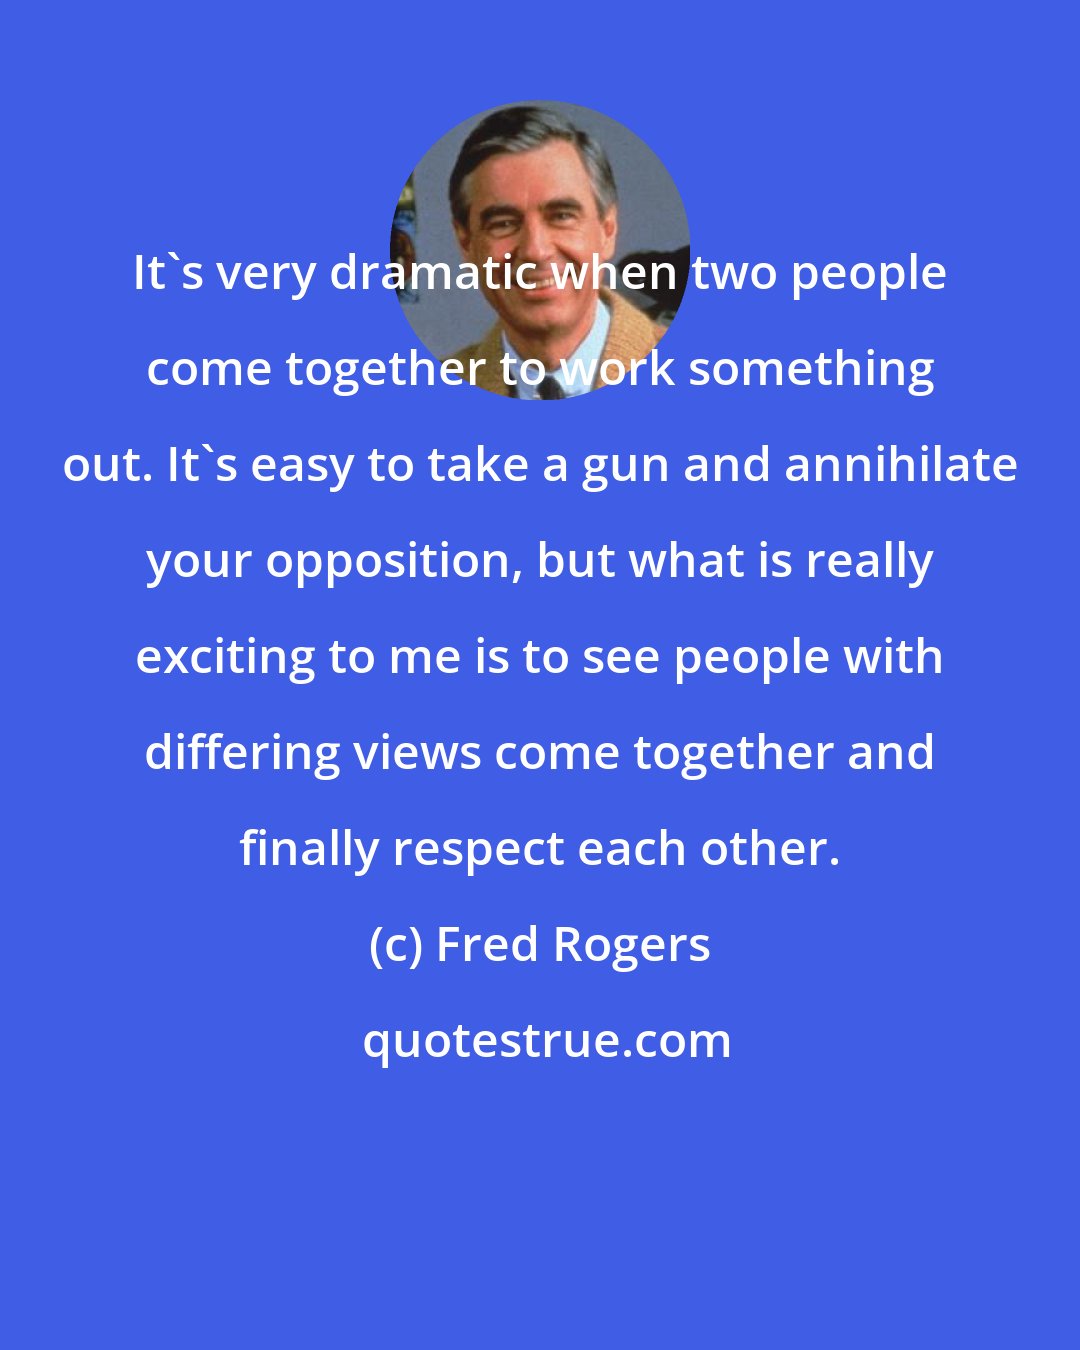 Fred Rogers: It's very dramatic when two people come together to work something out. It's easy to take a gun and annihilate your opposition, but what is really exciting to me is to see people with differing views come together and finally respect each other.